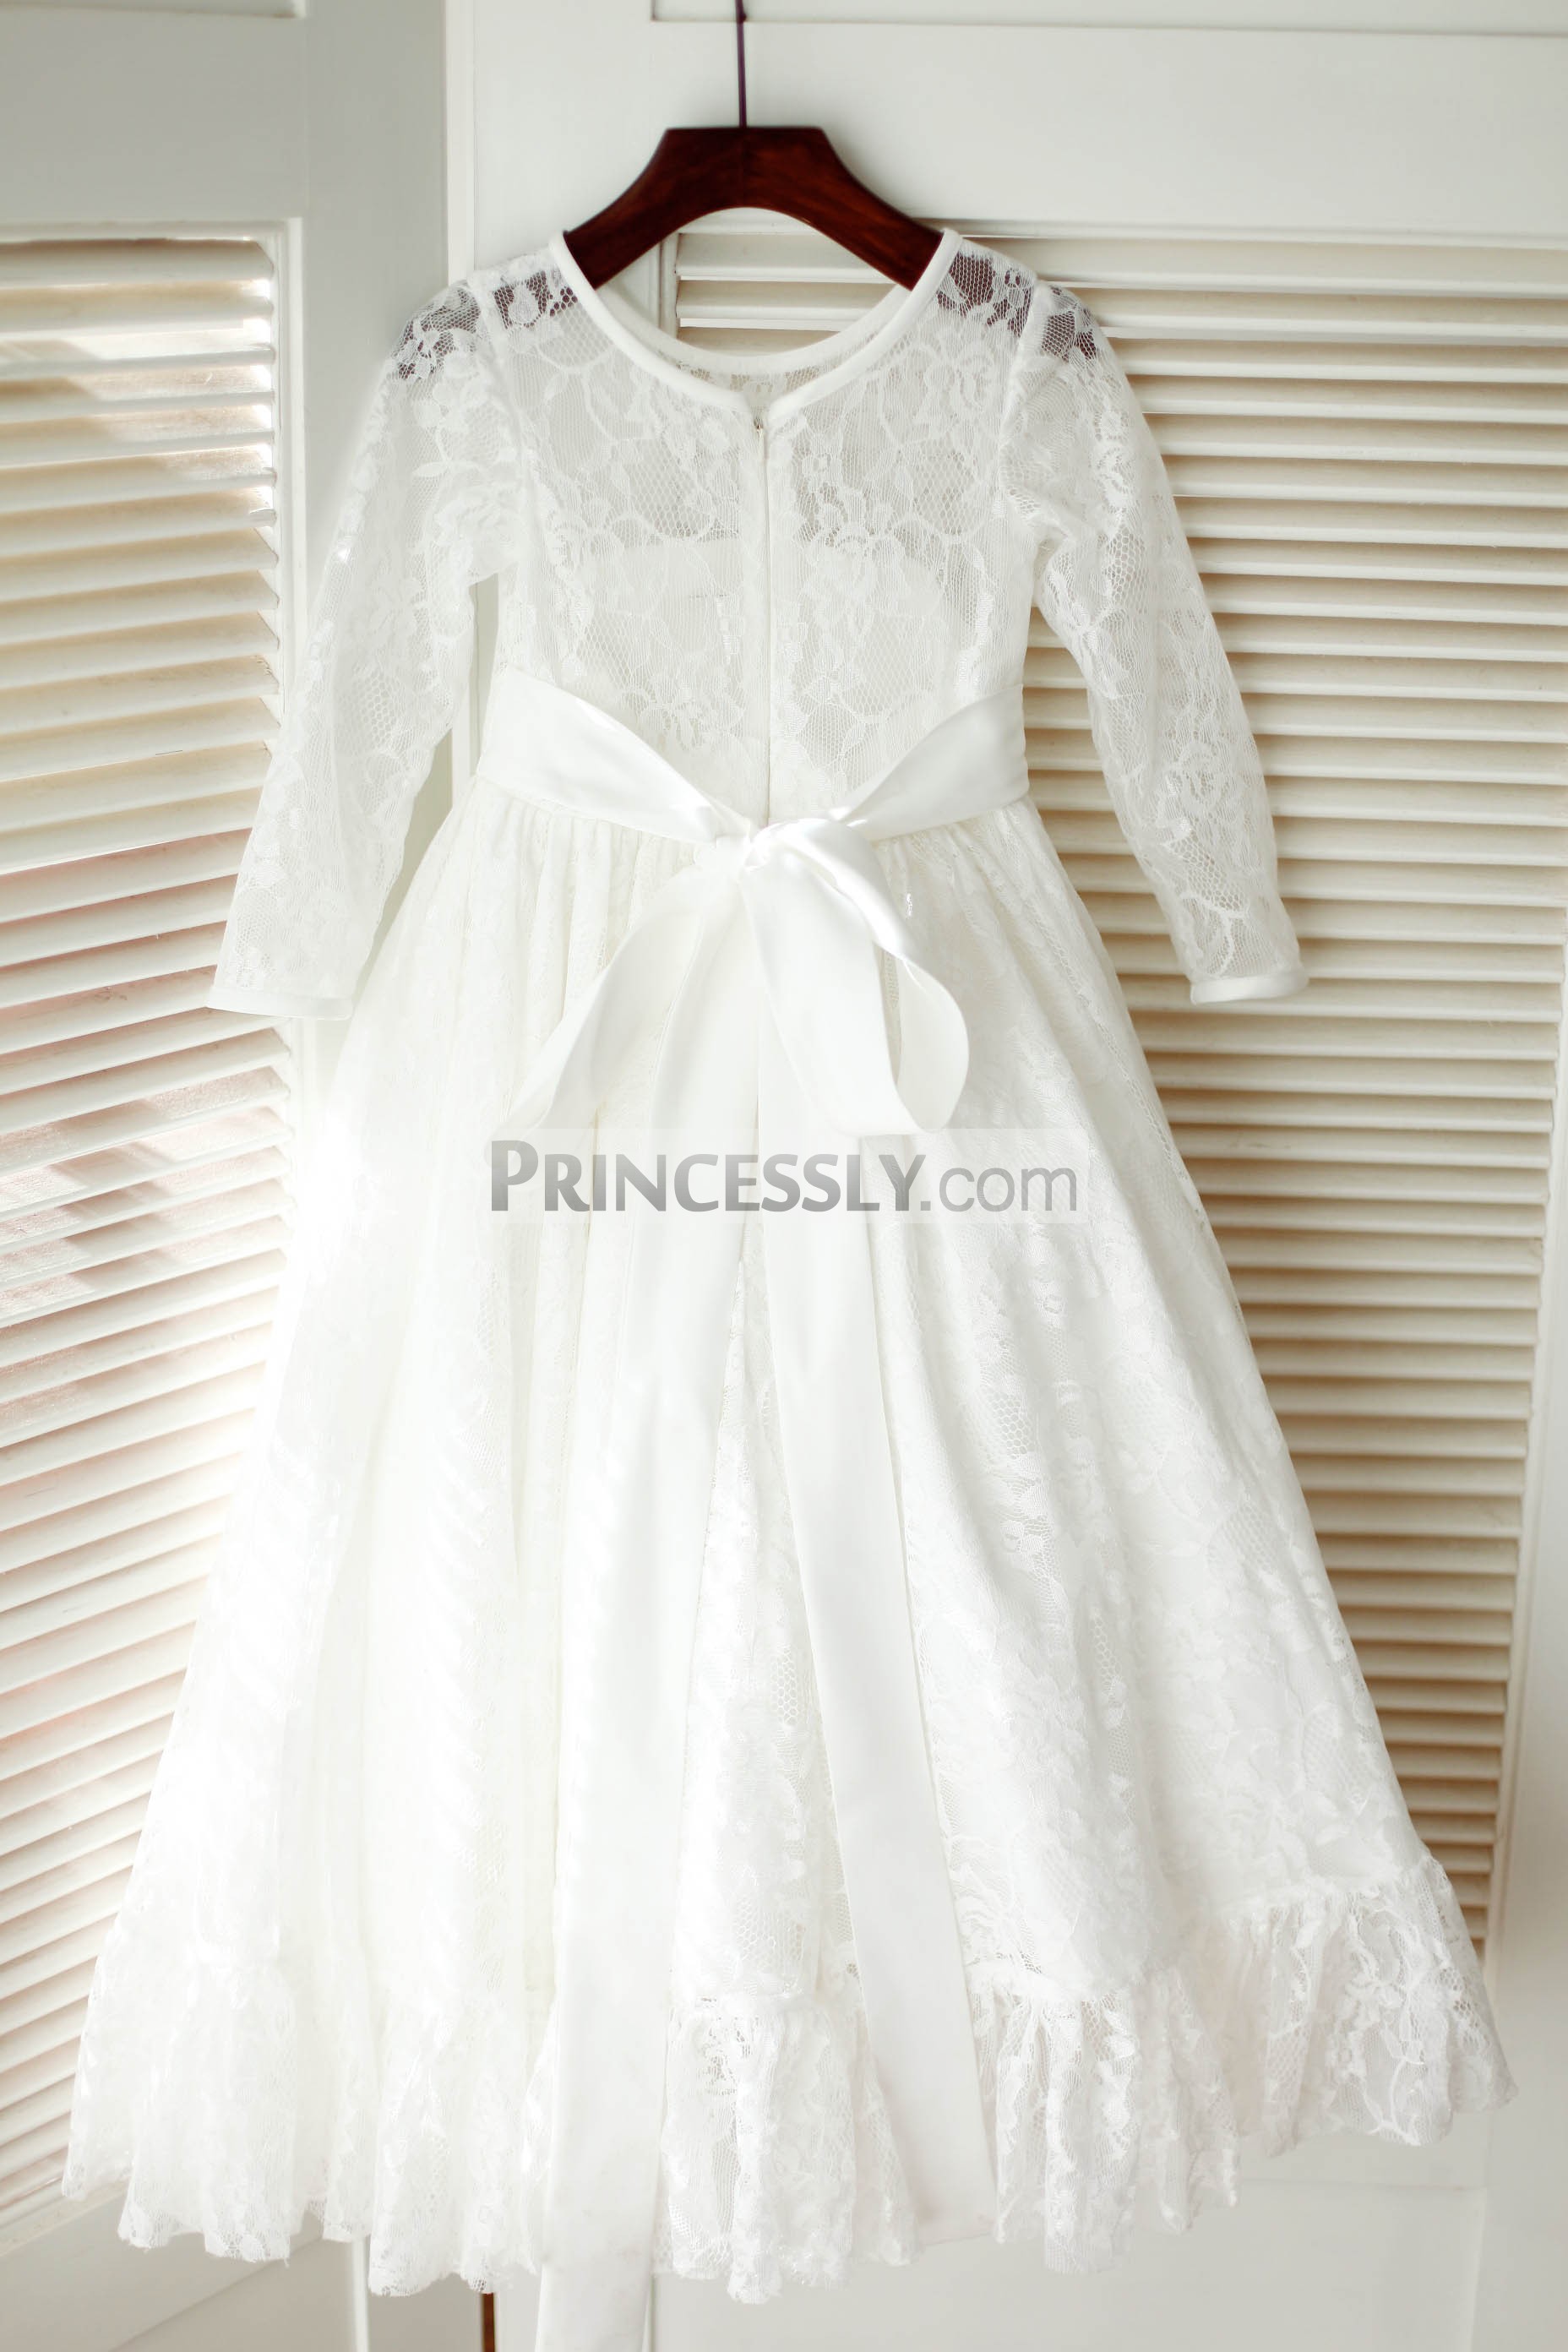 Fully lined zipper wedding baby girl dress with sash and flounce hem